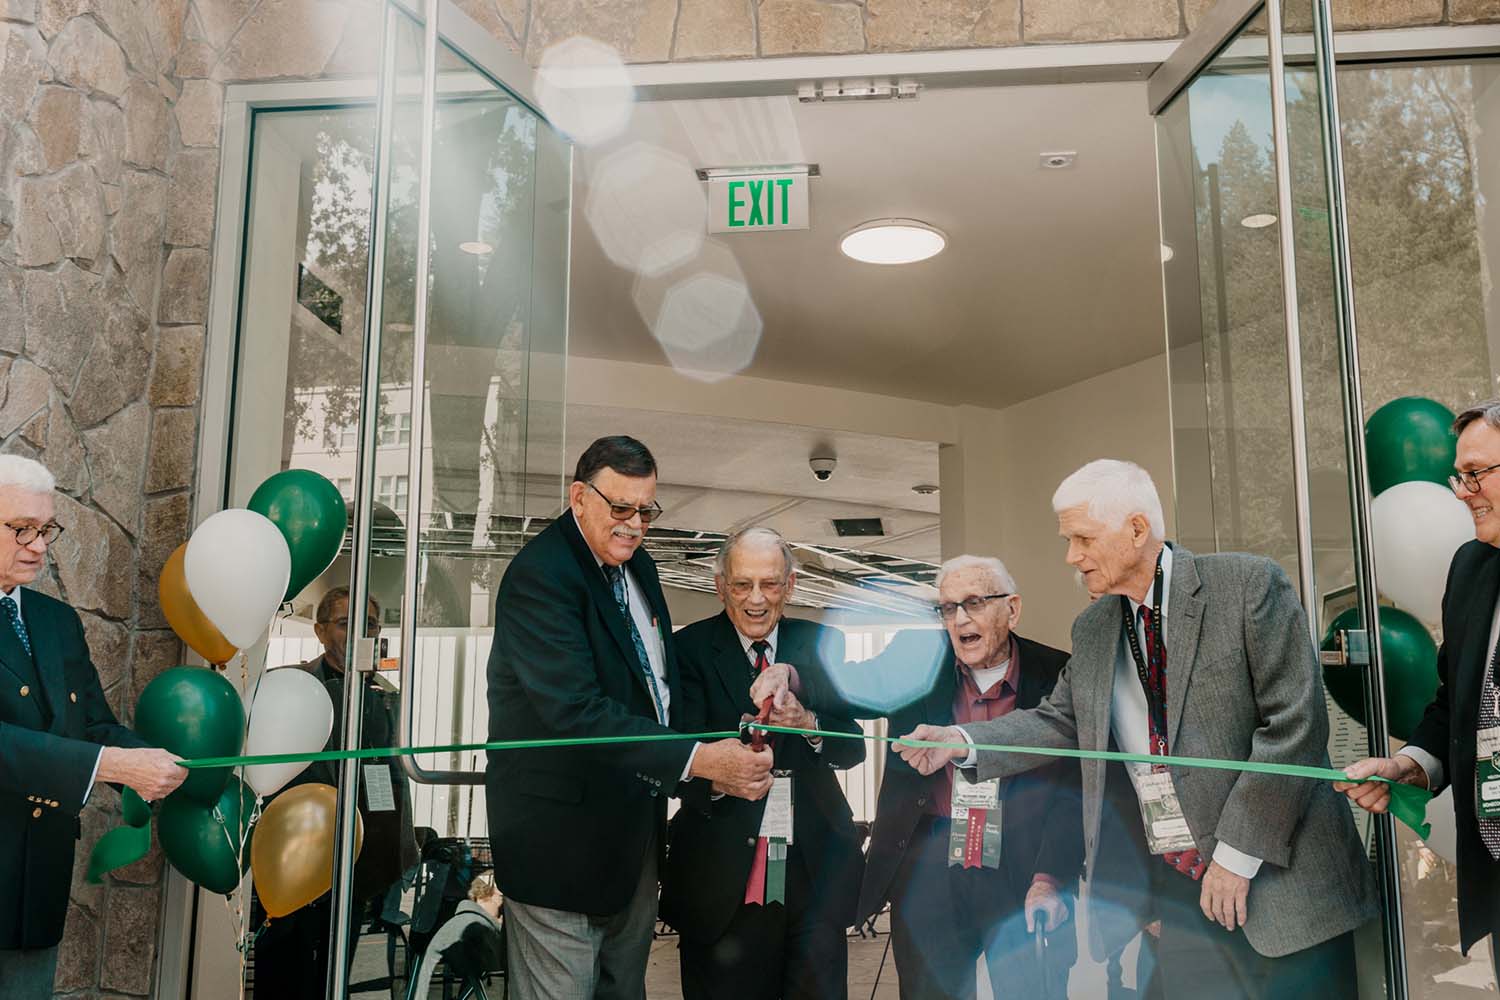 Ribbon-cutting ceremony for the Walter C. Utt Center on the campus of Pacific Union College in Angwin, California